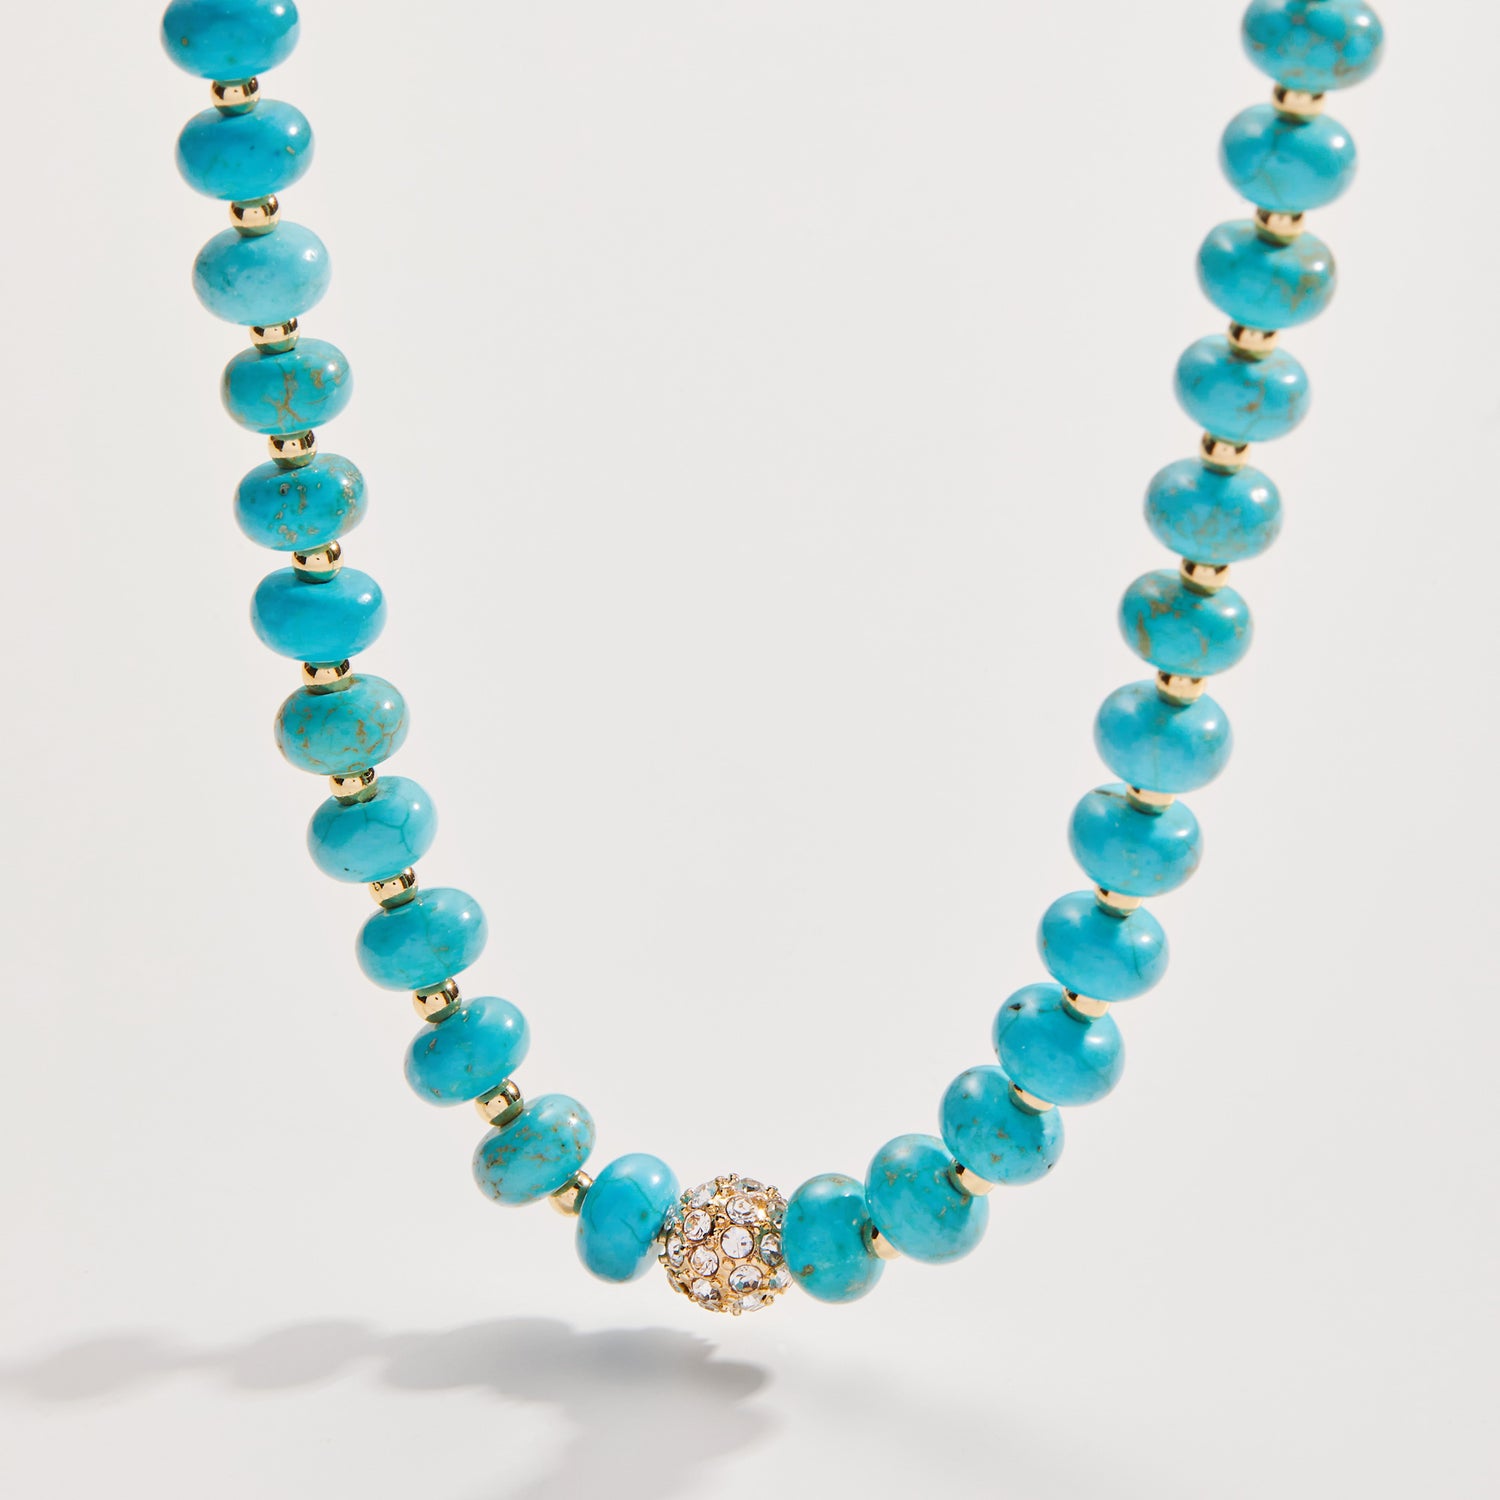 Fireball Turquoise Necklace